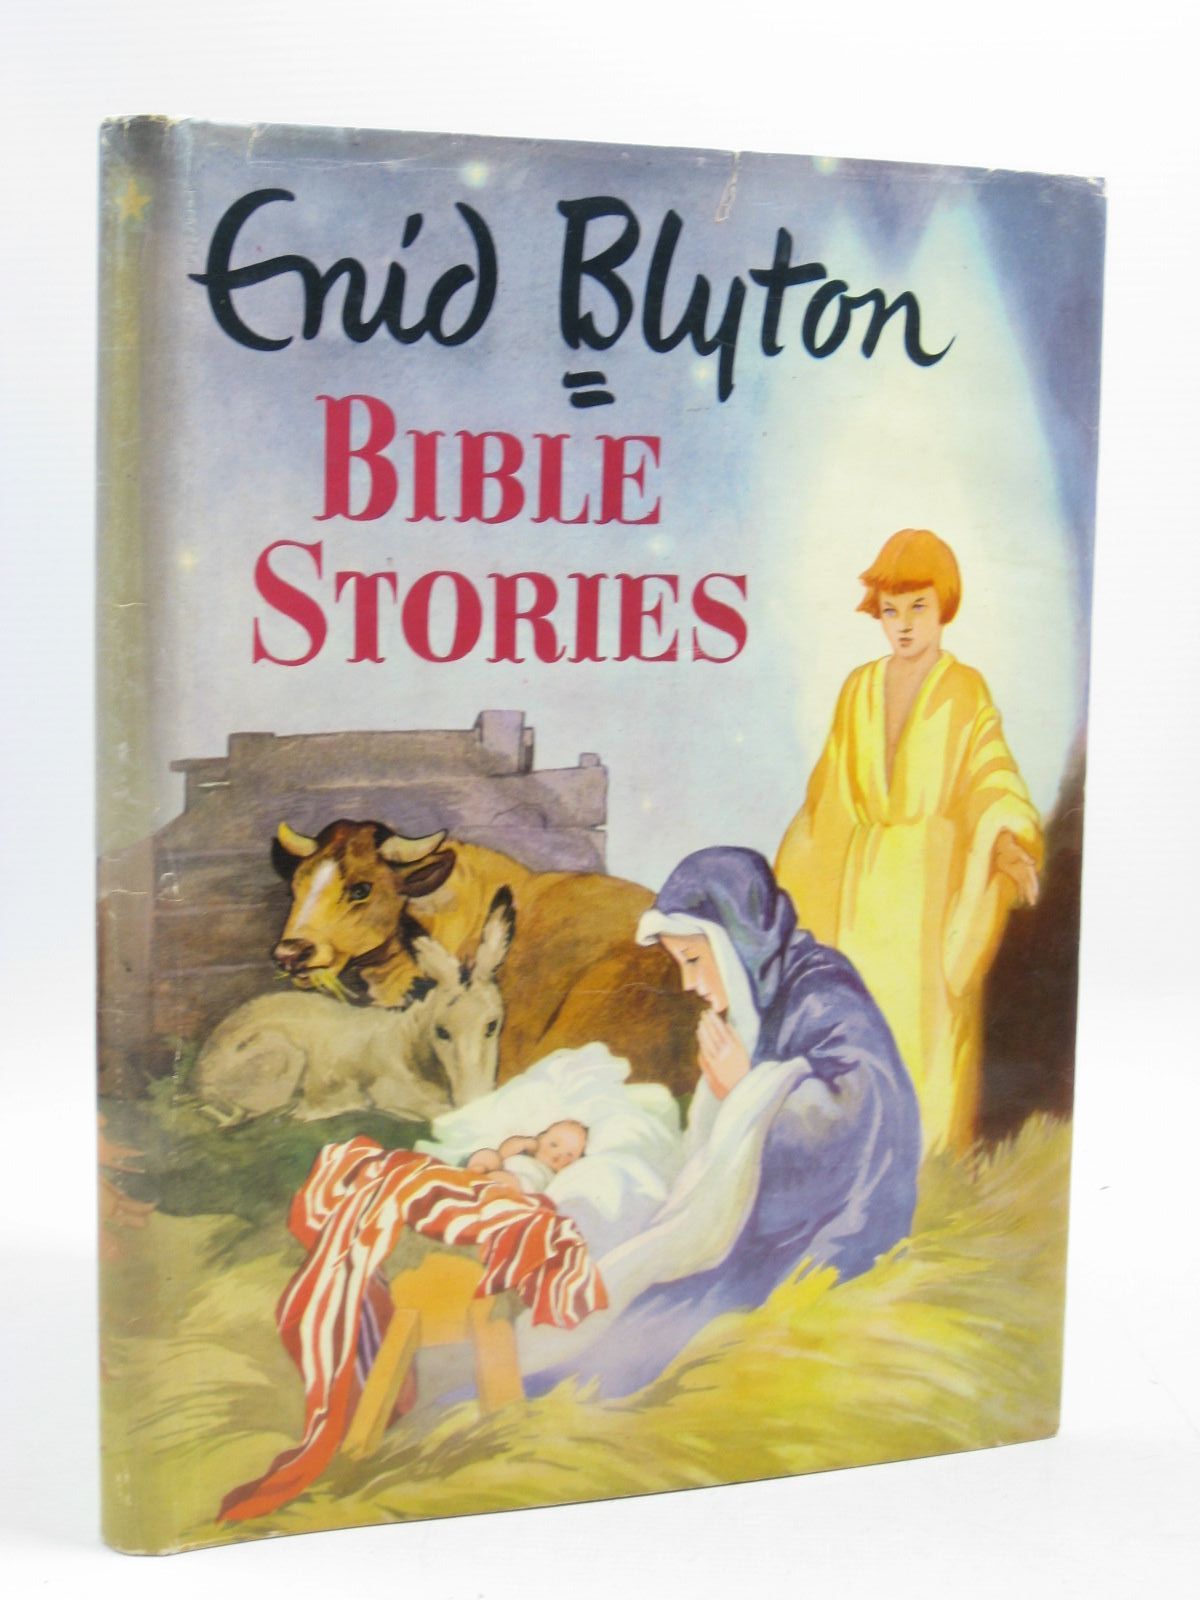 Cover of BIBLE STORIES by Enid Blyton